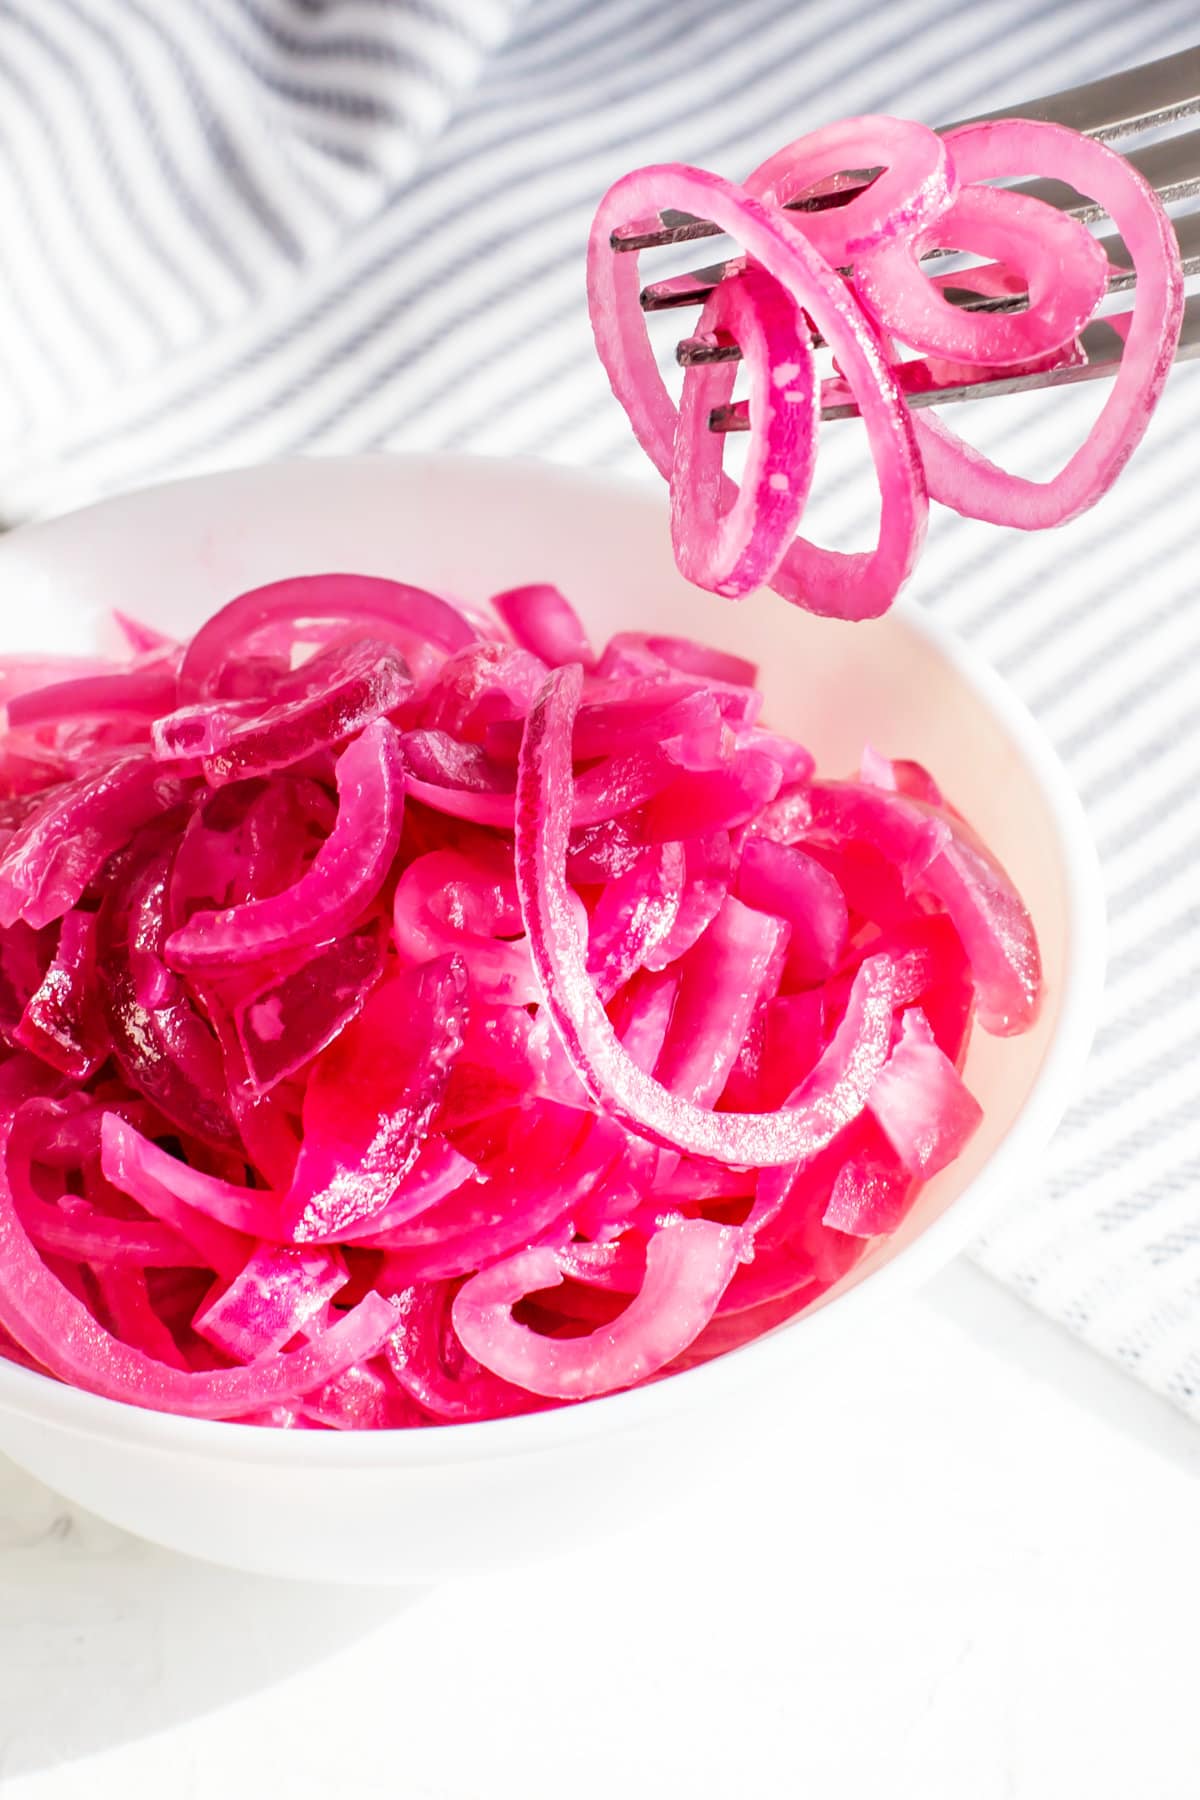 Juicy Mexican pickled red onion marinated in lemon juice on a light background.